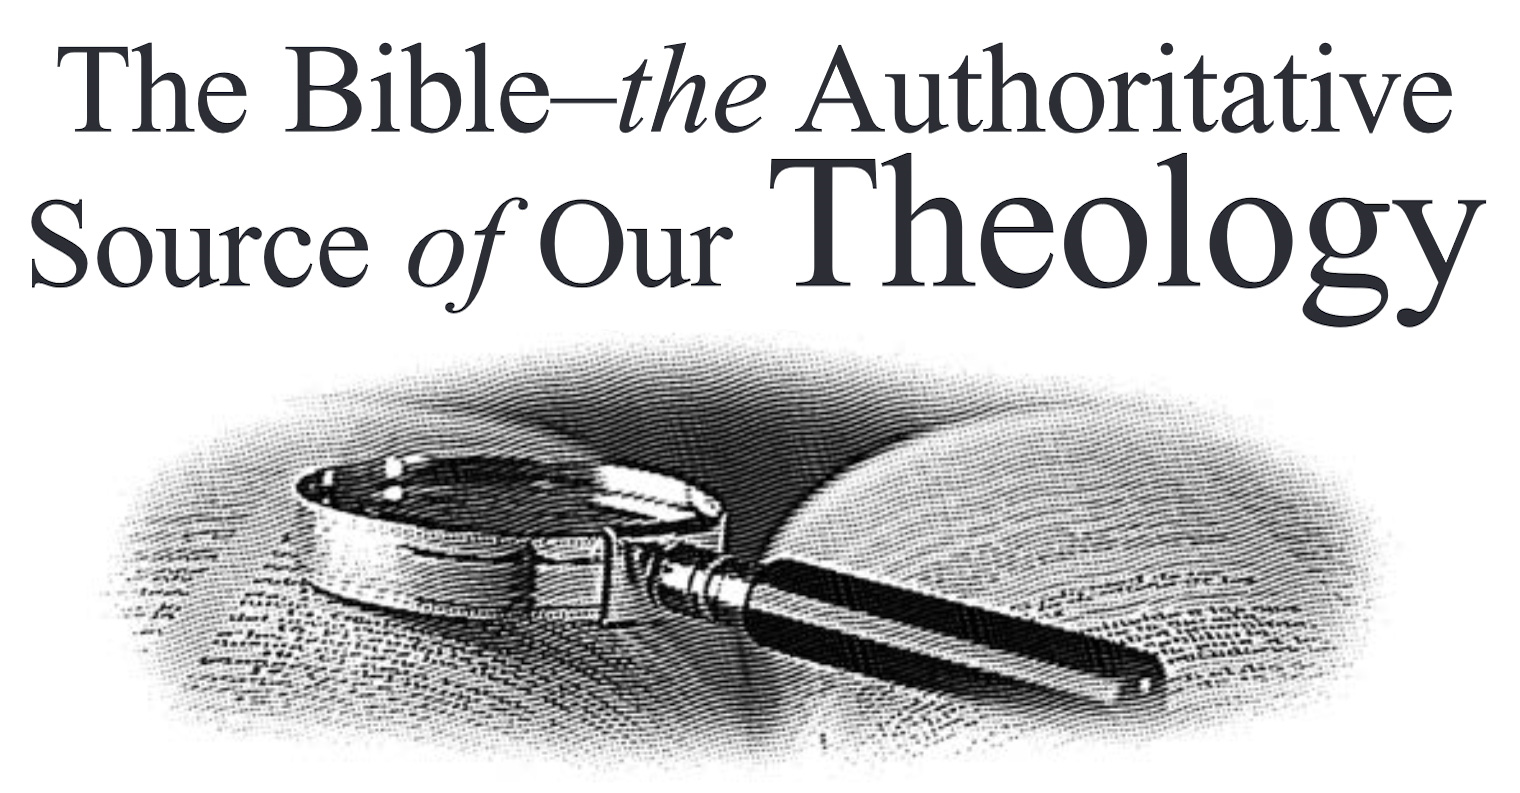 The Bible – the Authoritative Source of Our Theology